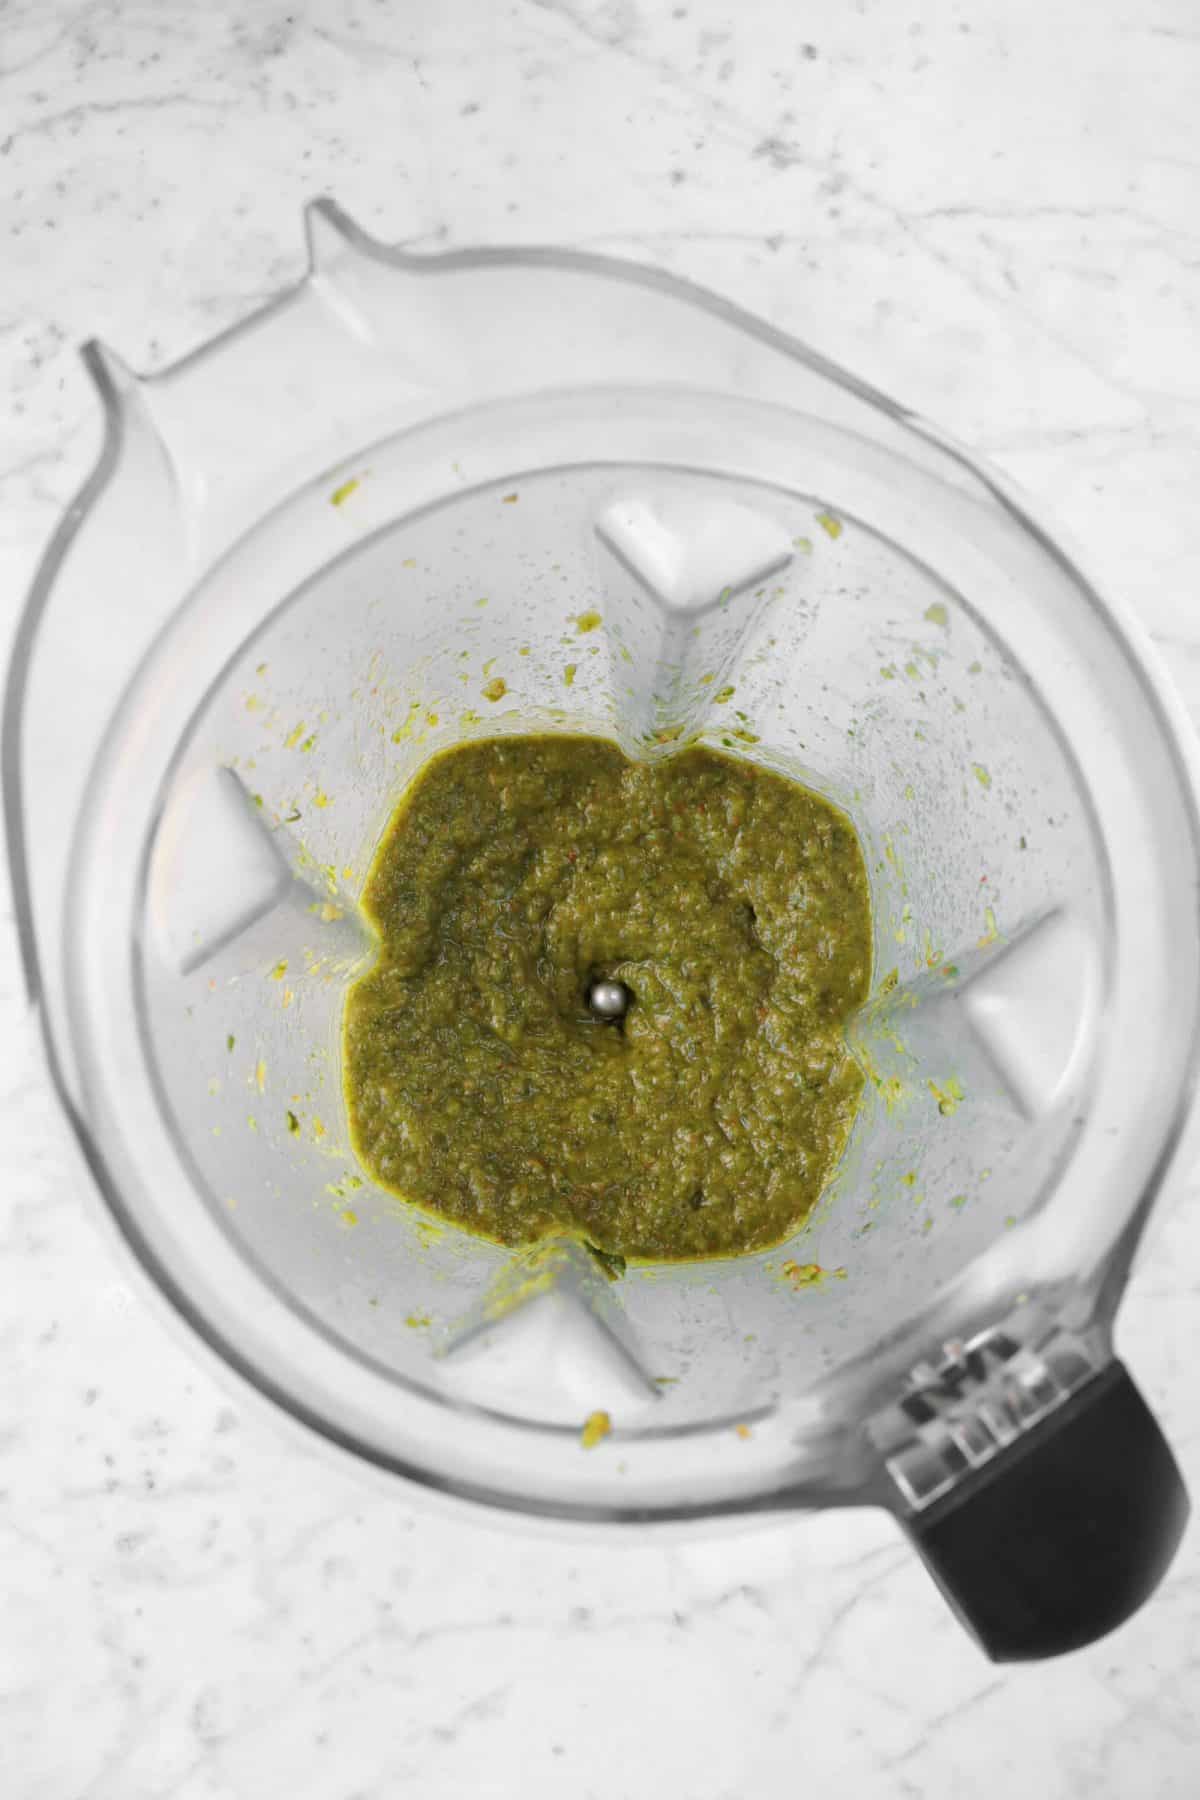 chili paste in a blender